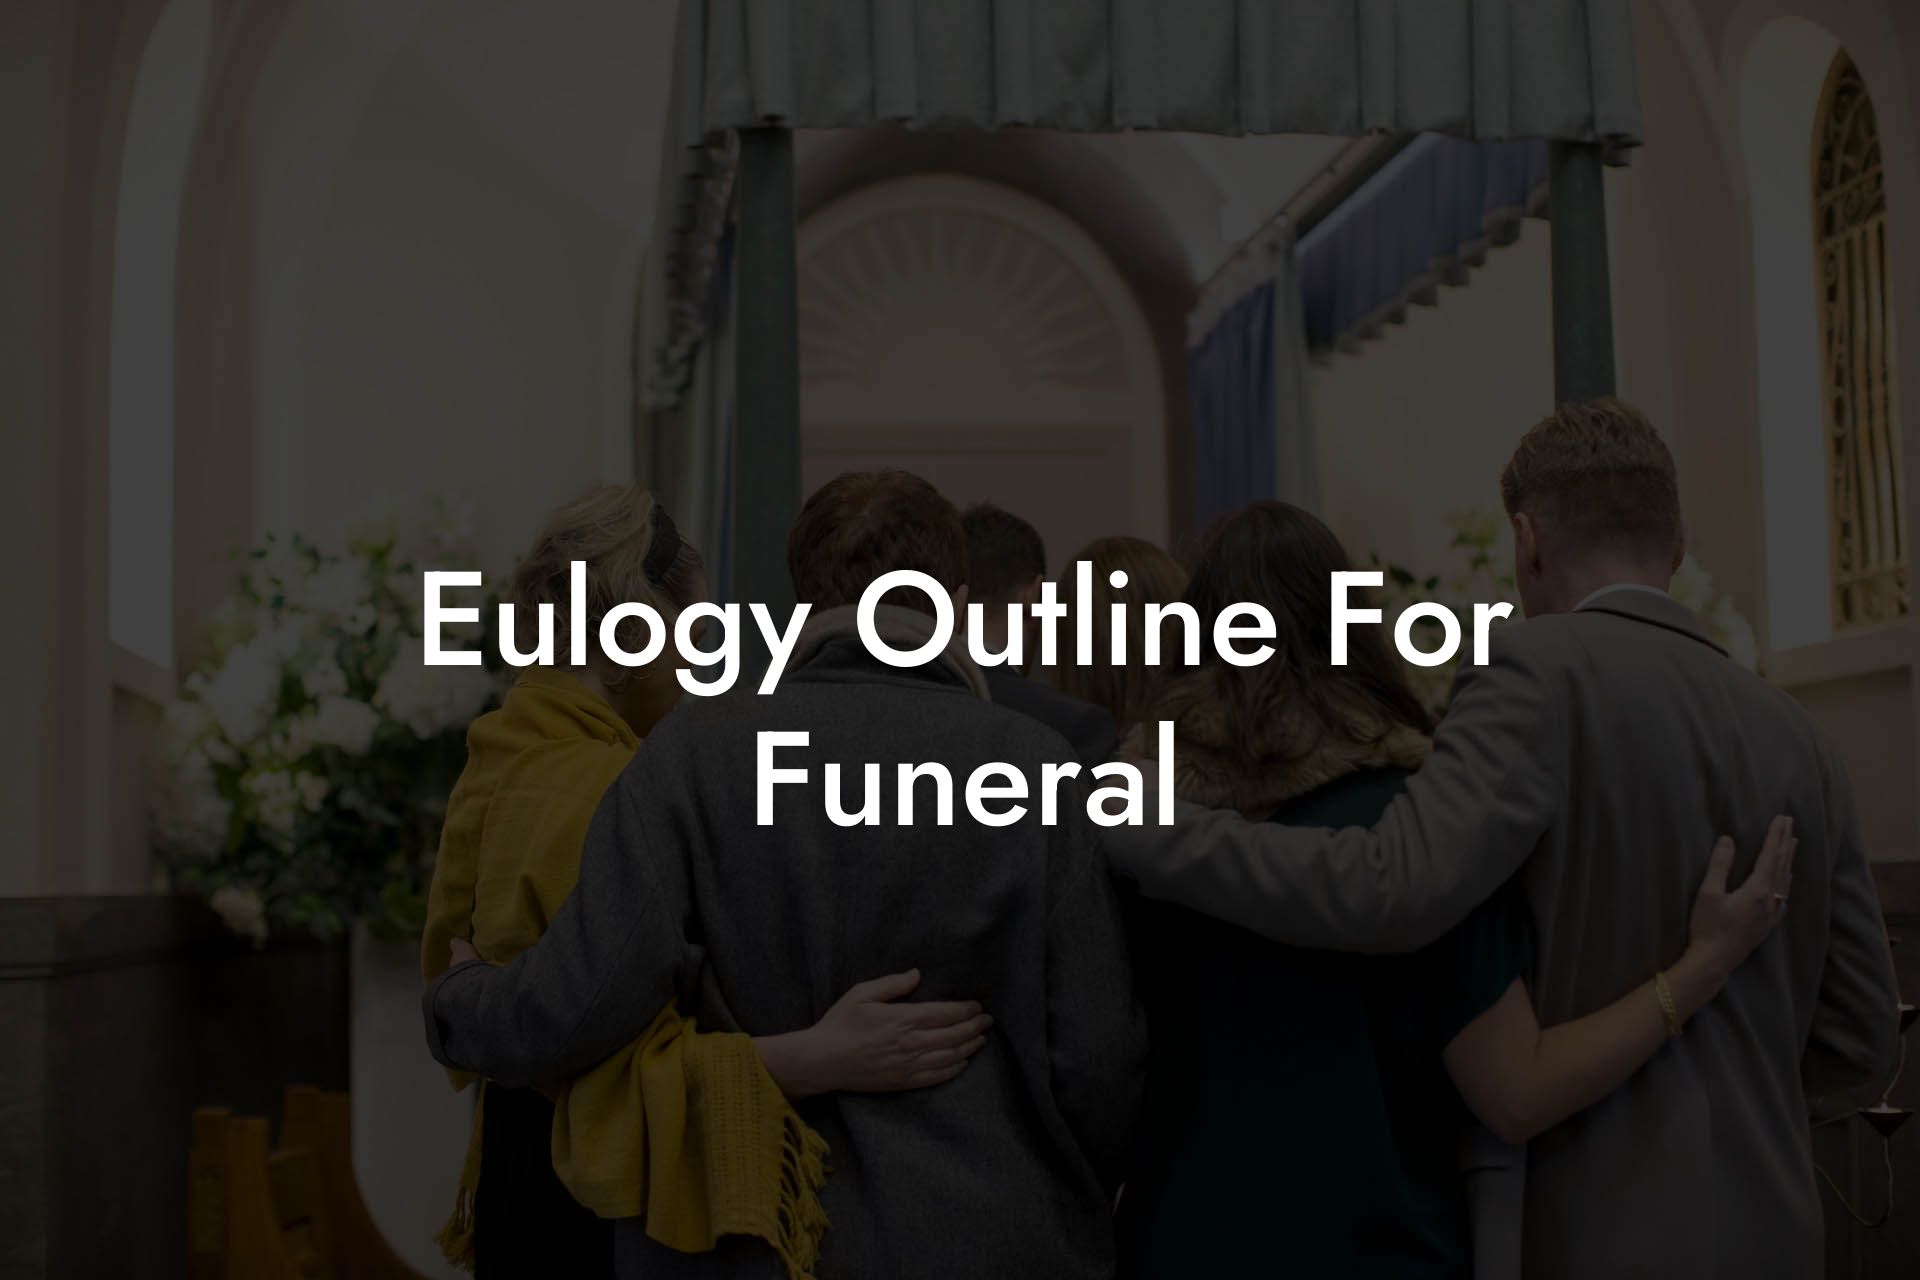 Eulogy Outline For Funeral